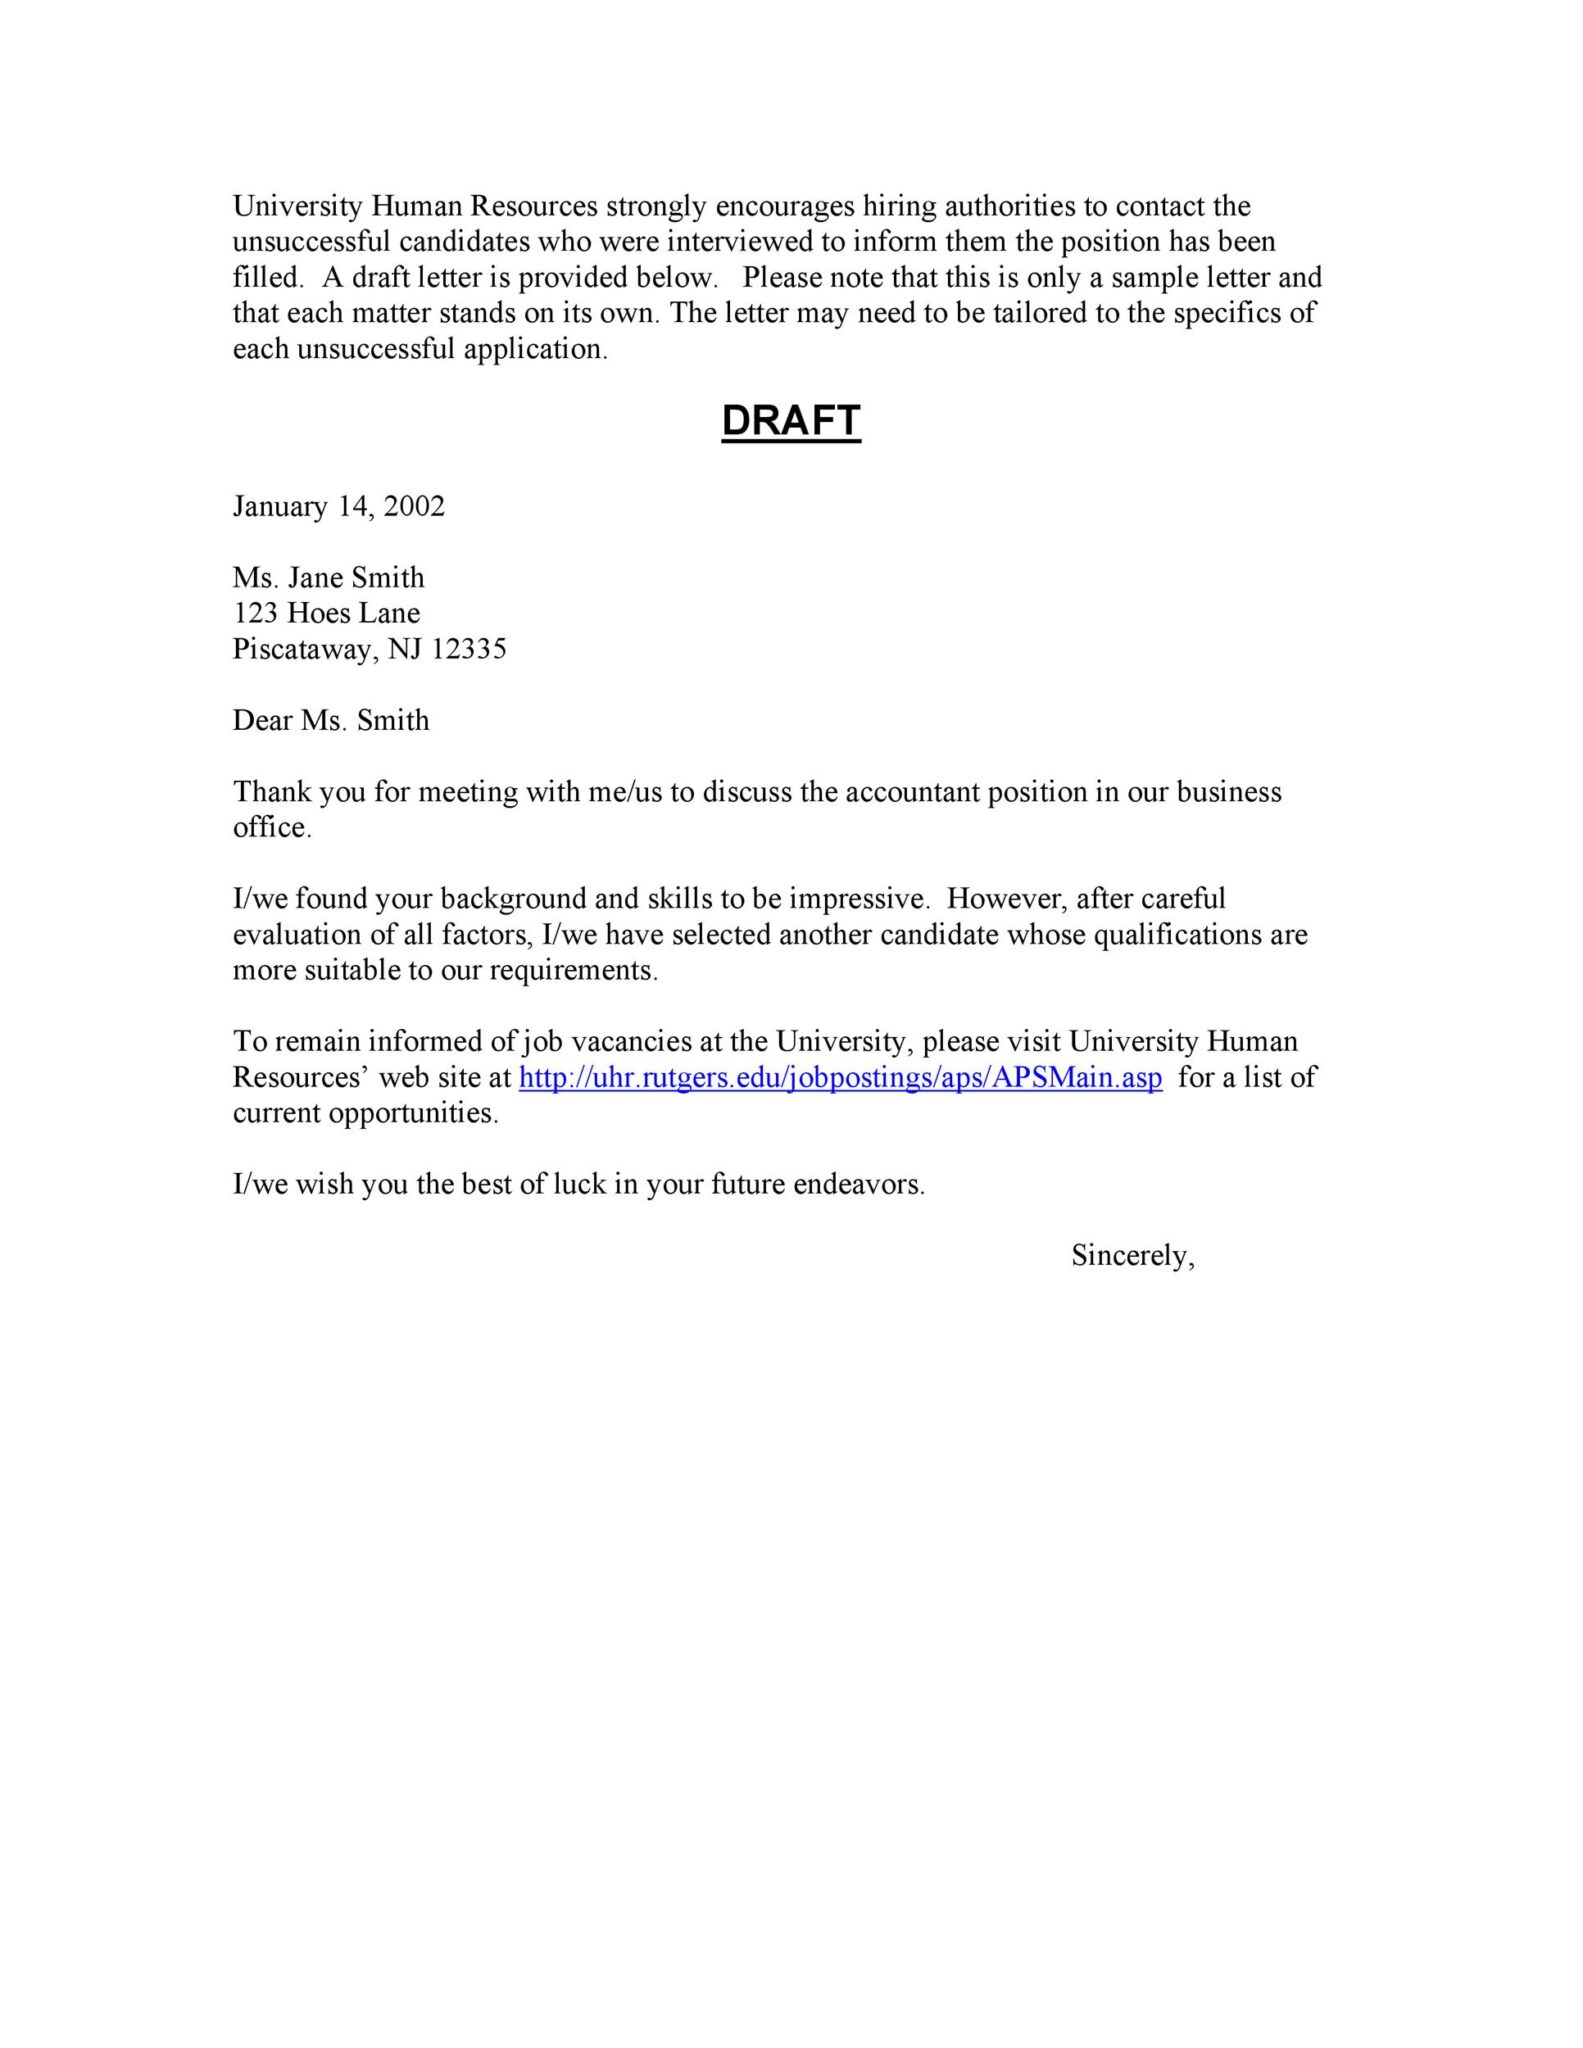 34-college-rejection-letter-samples-examples-templatelab-29